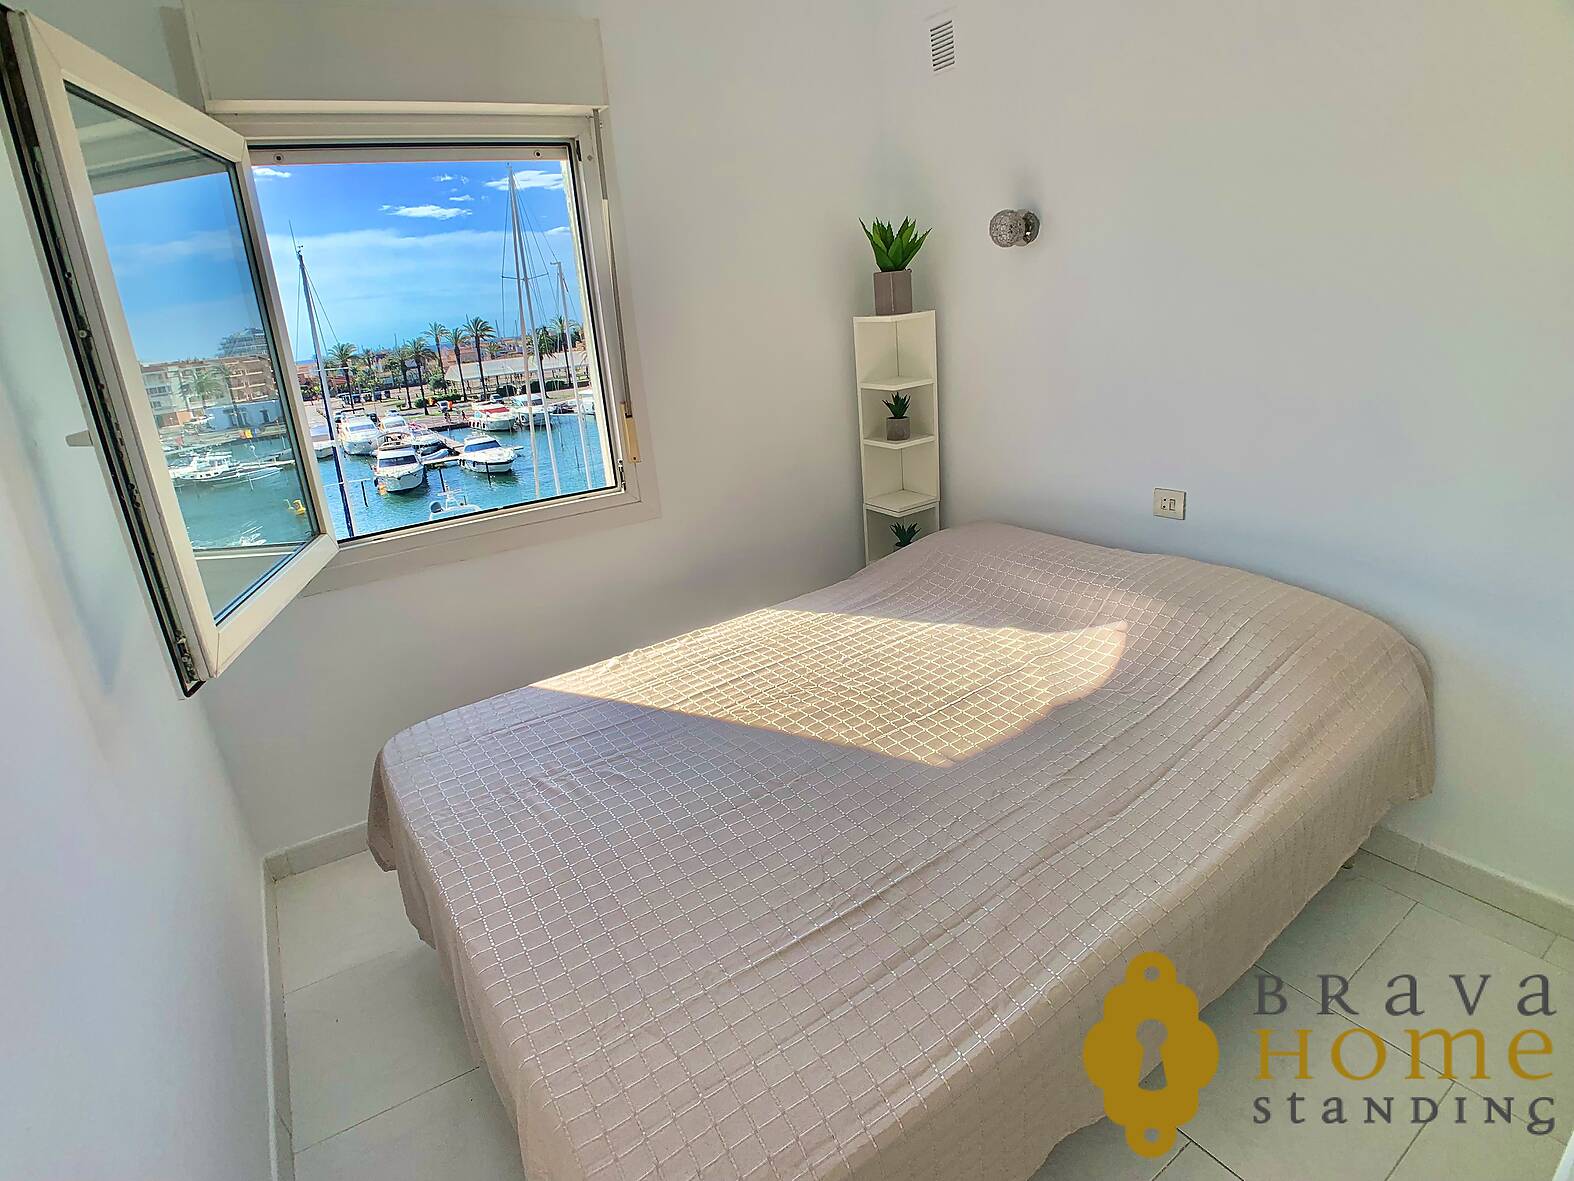 Splendid apartment overlooking the harbor and sea for sale in Empuriabrava